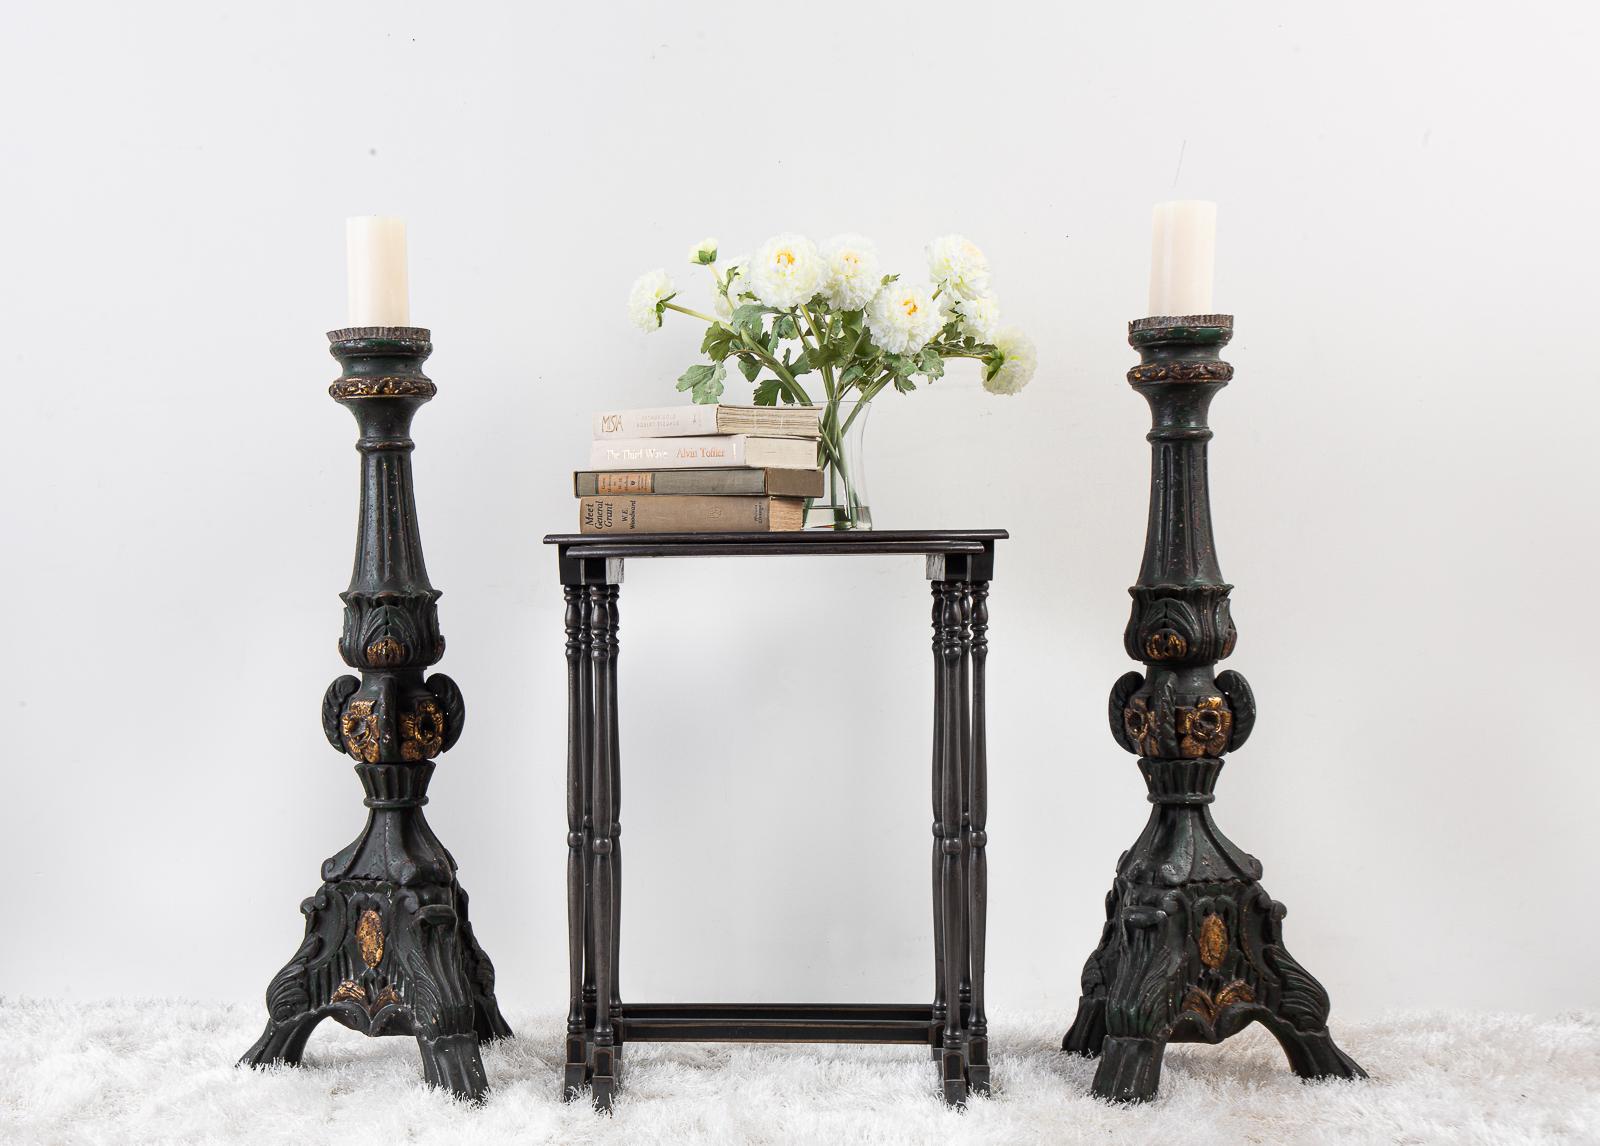 Pair of monumental 18th century Italian prickets made in the Rococo style of carved and polychromed wood. These altar candlesticks feature a three footed base and a floral motif with gilt highlights and original pie crust tops. Finished in a rich,